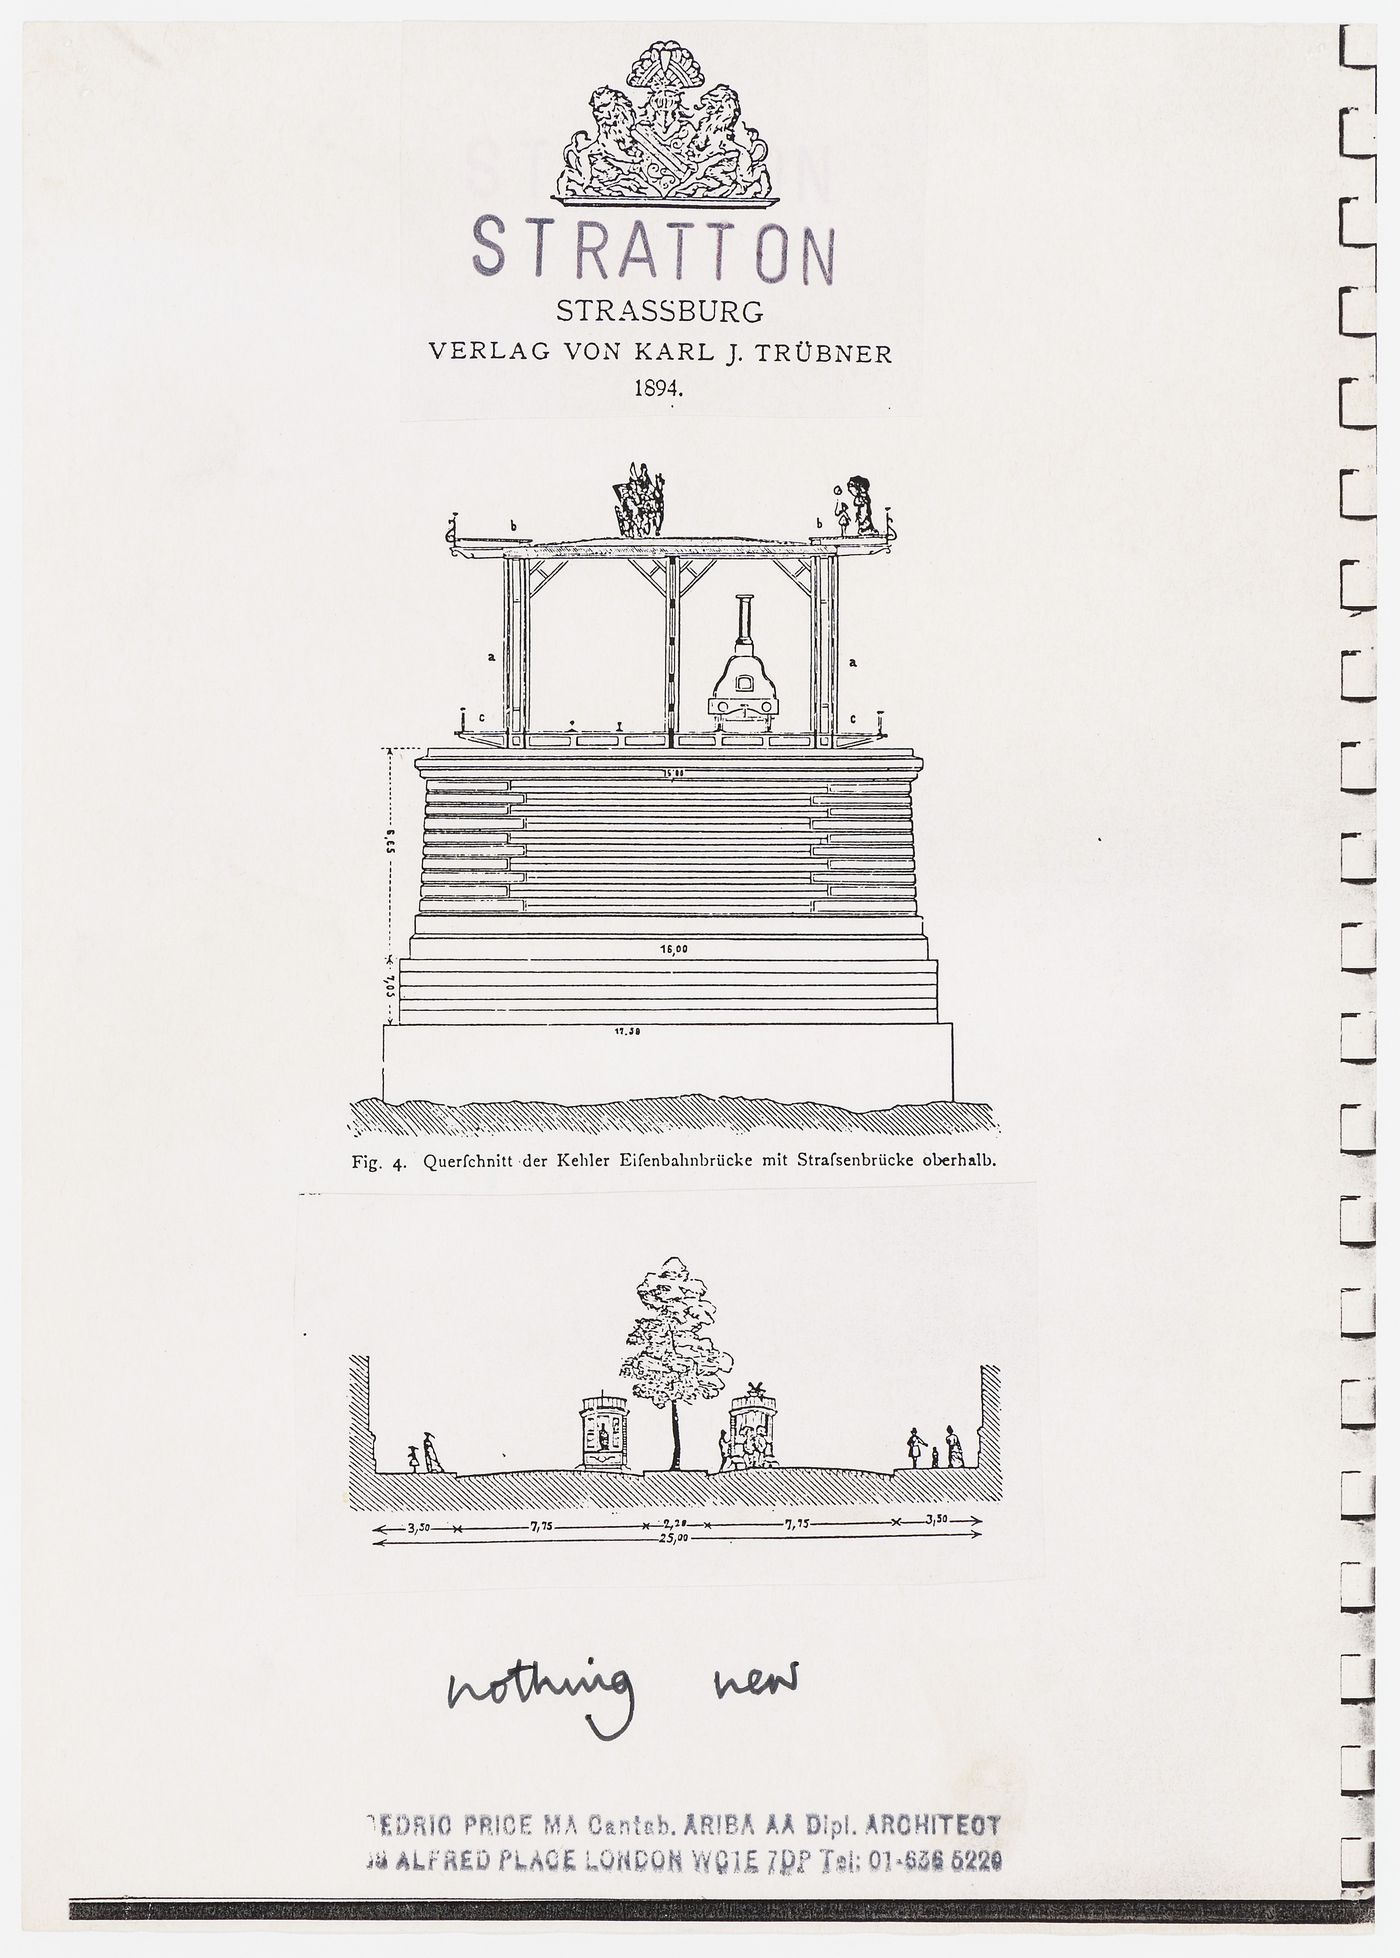 Stratton: illustrations from an 1894 publication: section of Kehl railway bridge with a road bridge above, and, section of a streetcar system, with comment "nothing new"